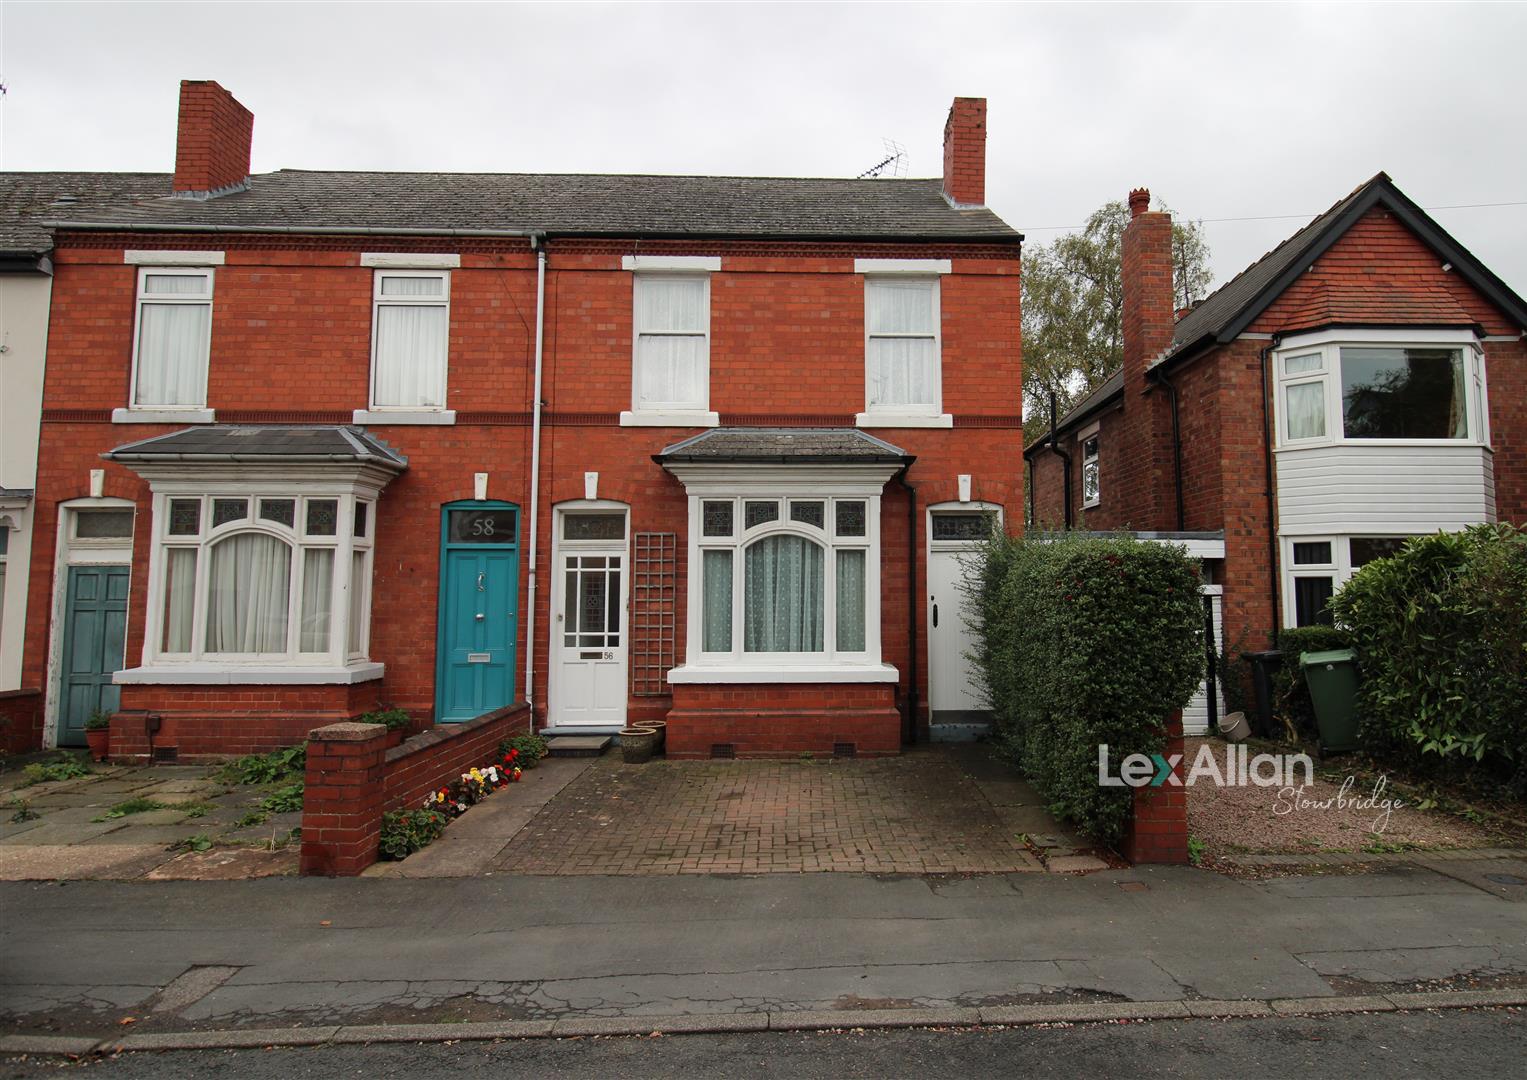 3 bed  for sale in Bridle Road, Stourbridge, DY8 